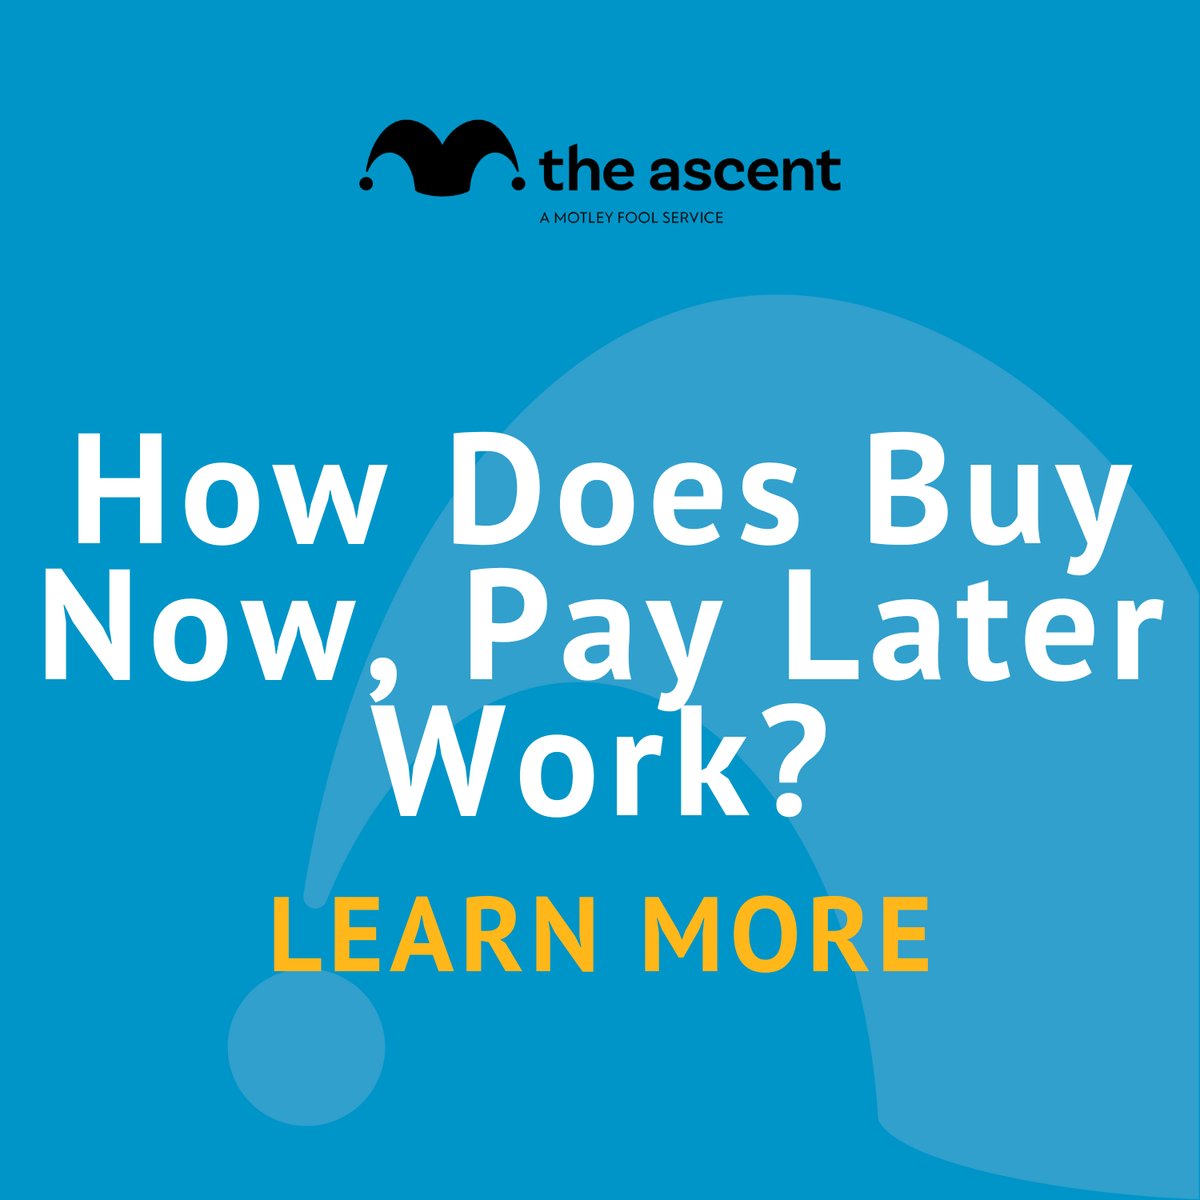 How Does Buy Now, Pay Later Work?